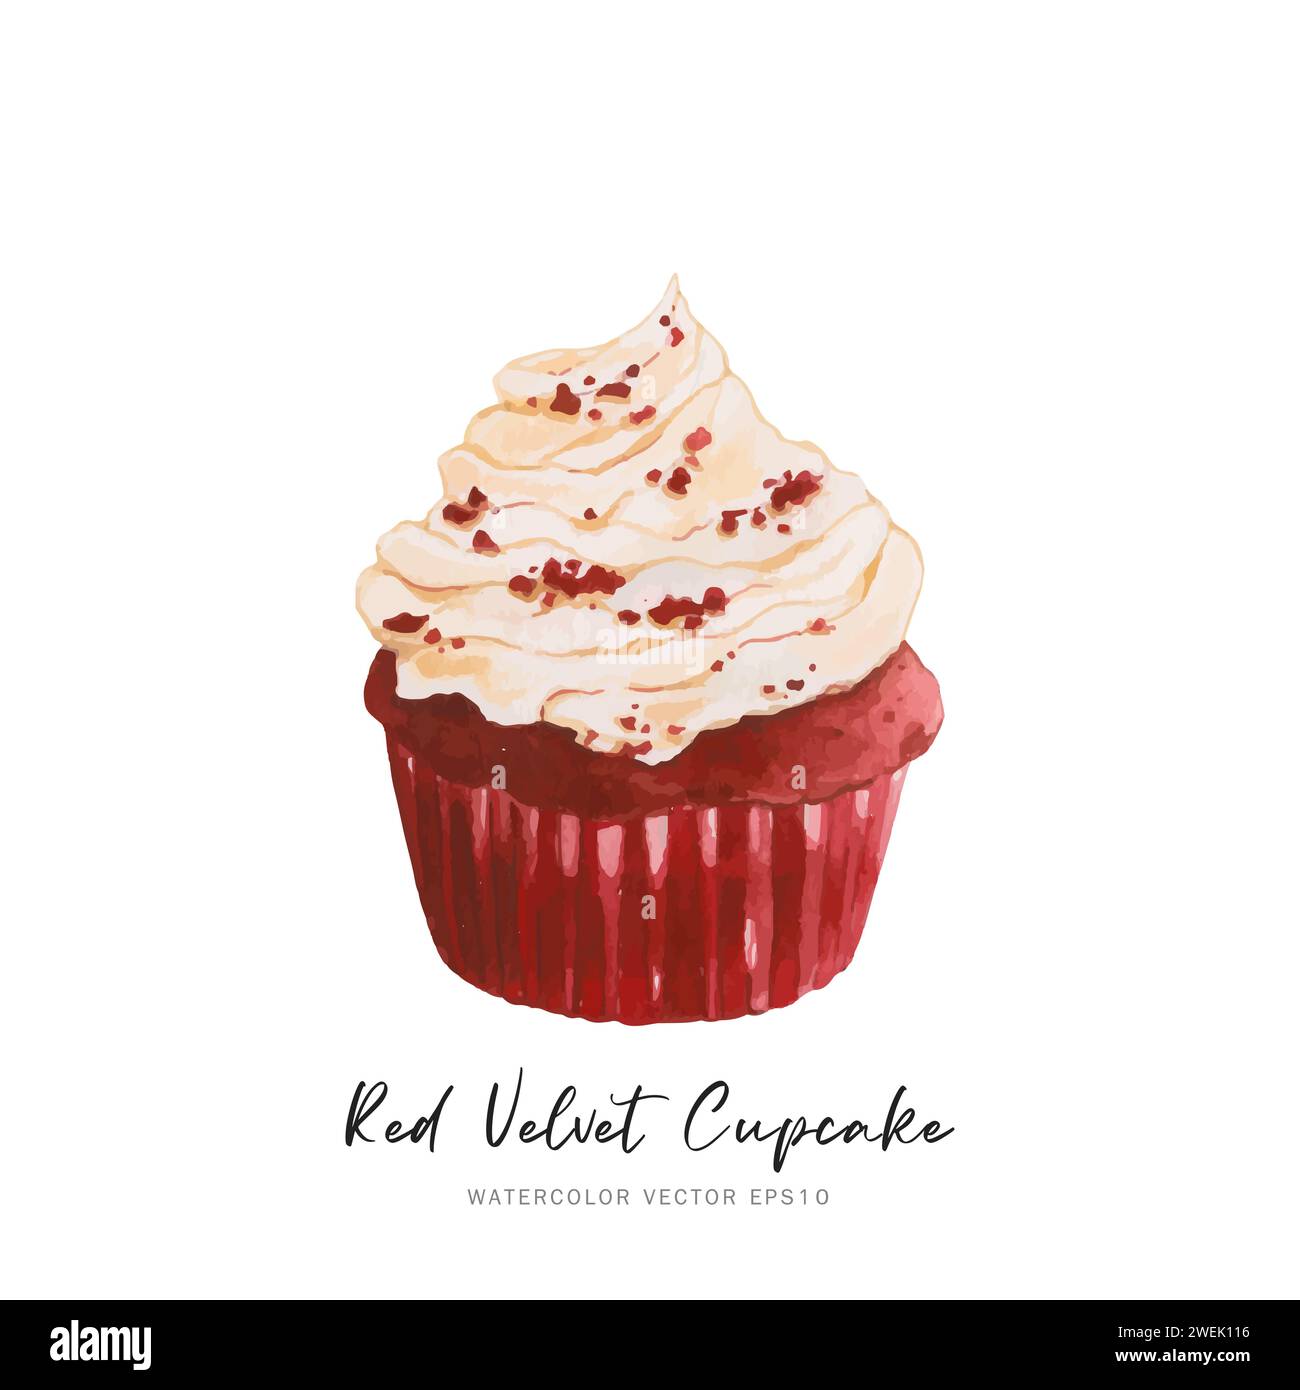 Red velvet cupcake dessert, watercolor food painting vector design isolated on white background Stock Vector